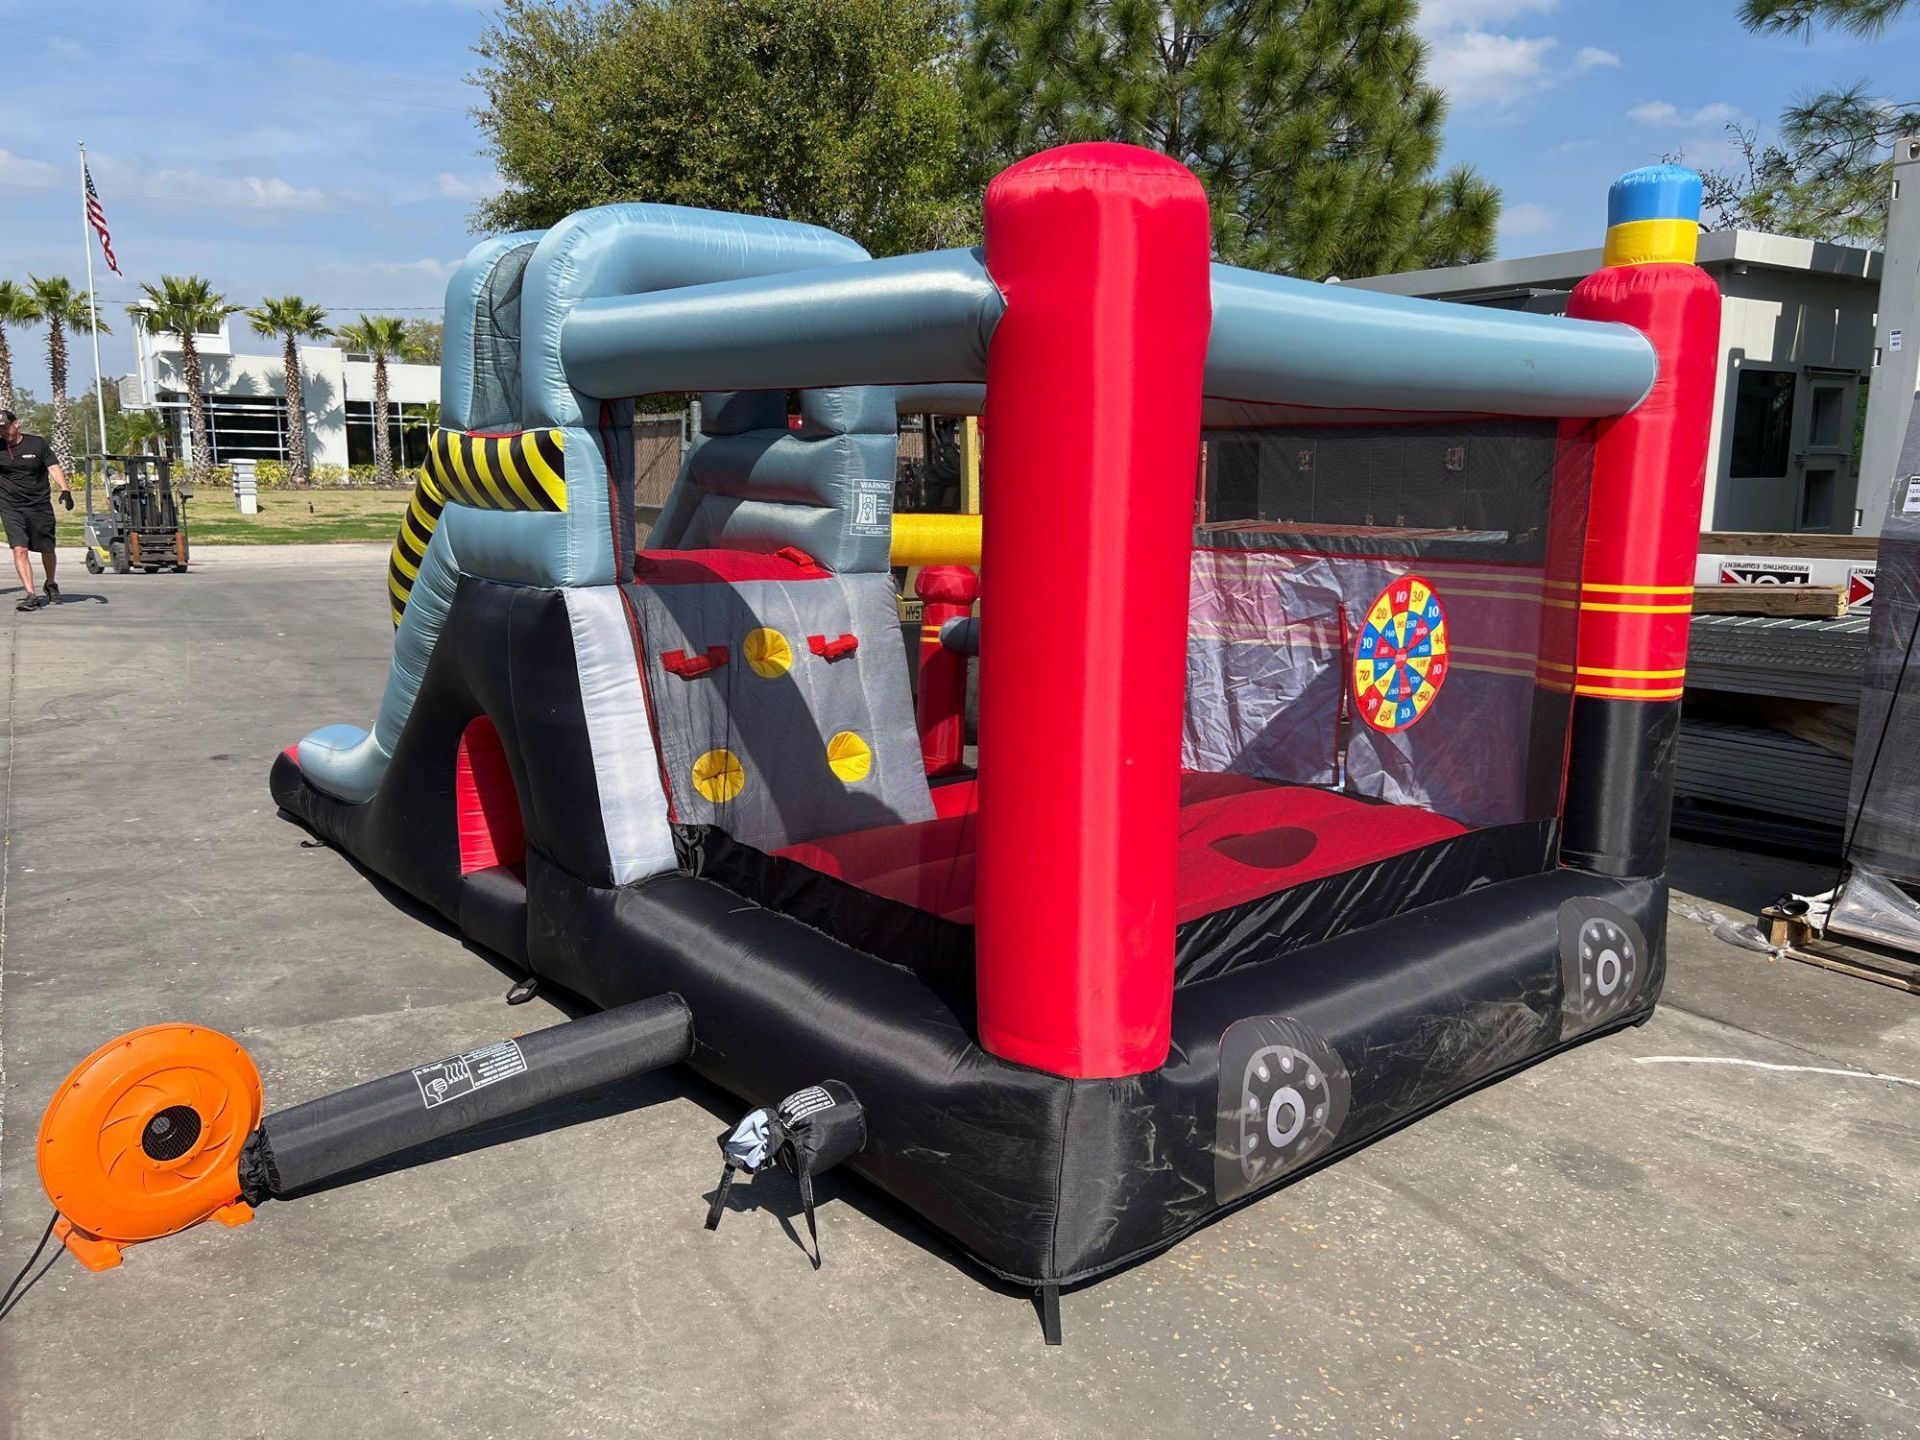 UNUSED BLOW-UP BOUNCY FIRE STATION PLAY YARD WITH SLIDE, VELCRO DARTS, BALLS, STAKES, & BLOWER - Image 6 of 12